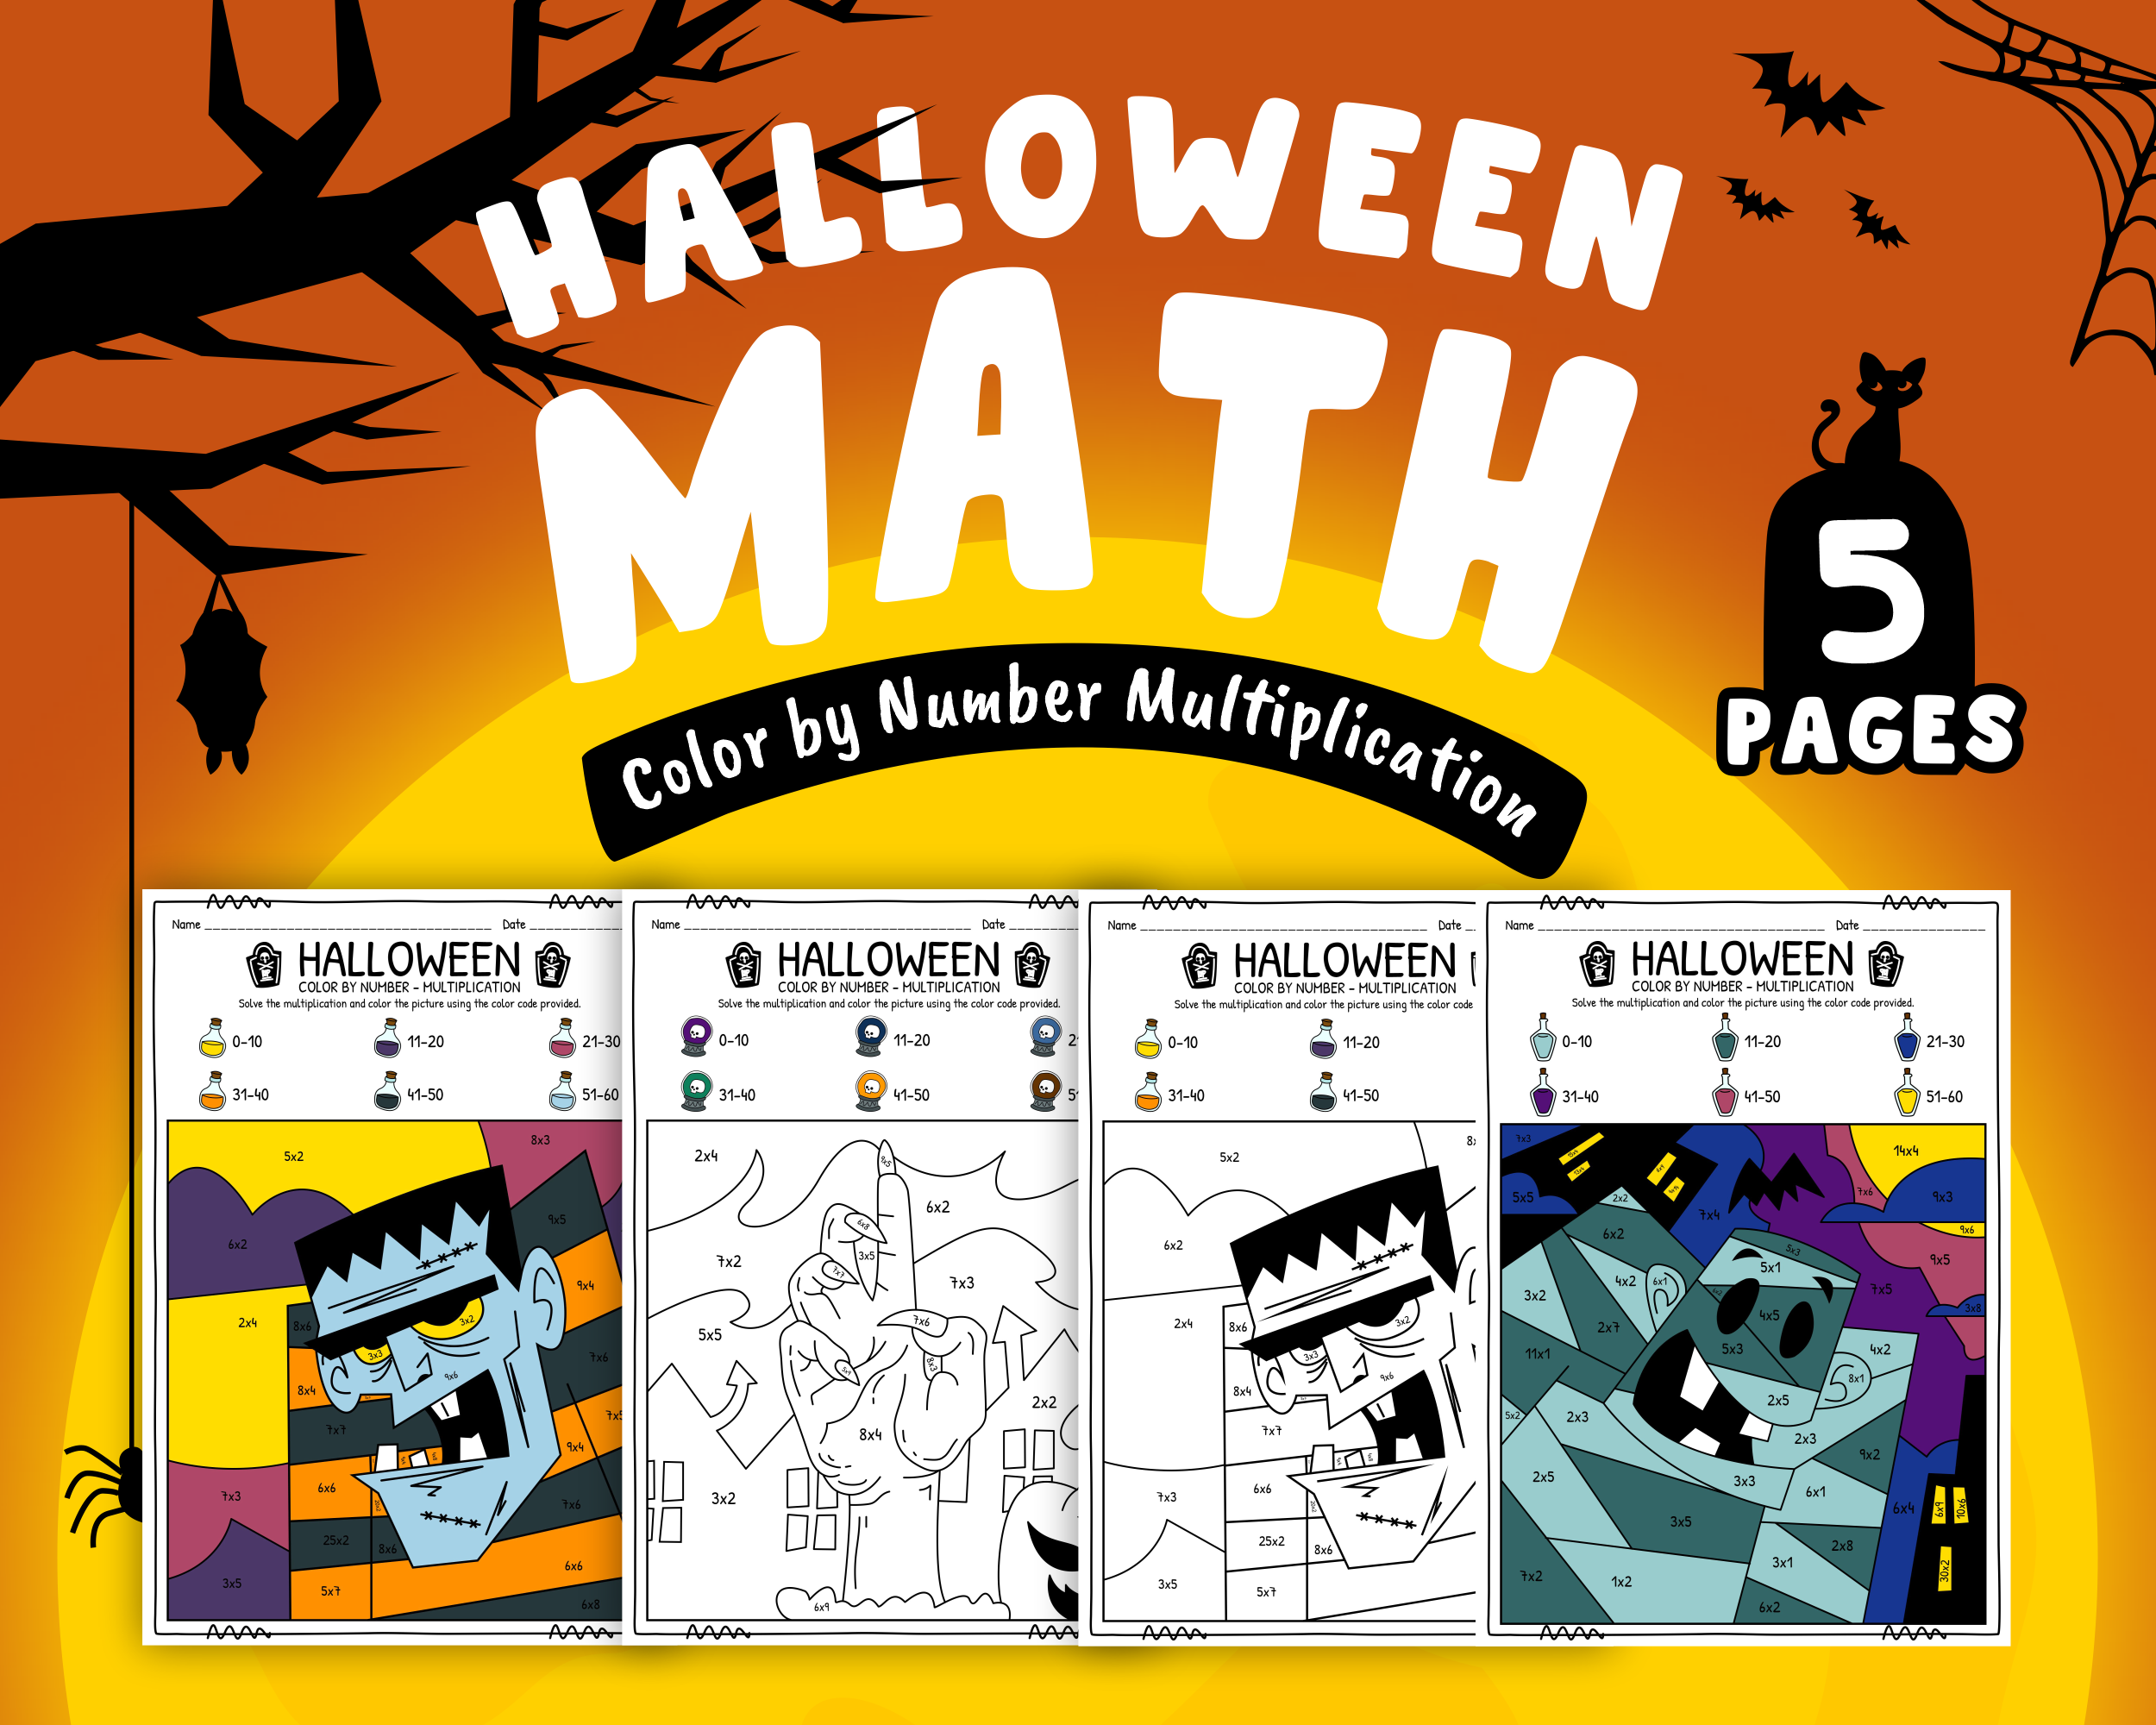 Printable Coloring Pages for Kids Halloween Party Favors - Color by Number (Multiplication)